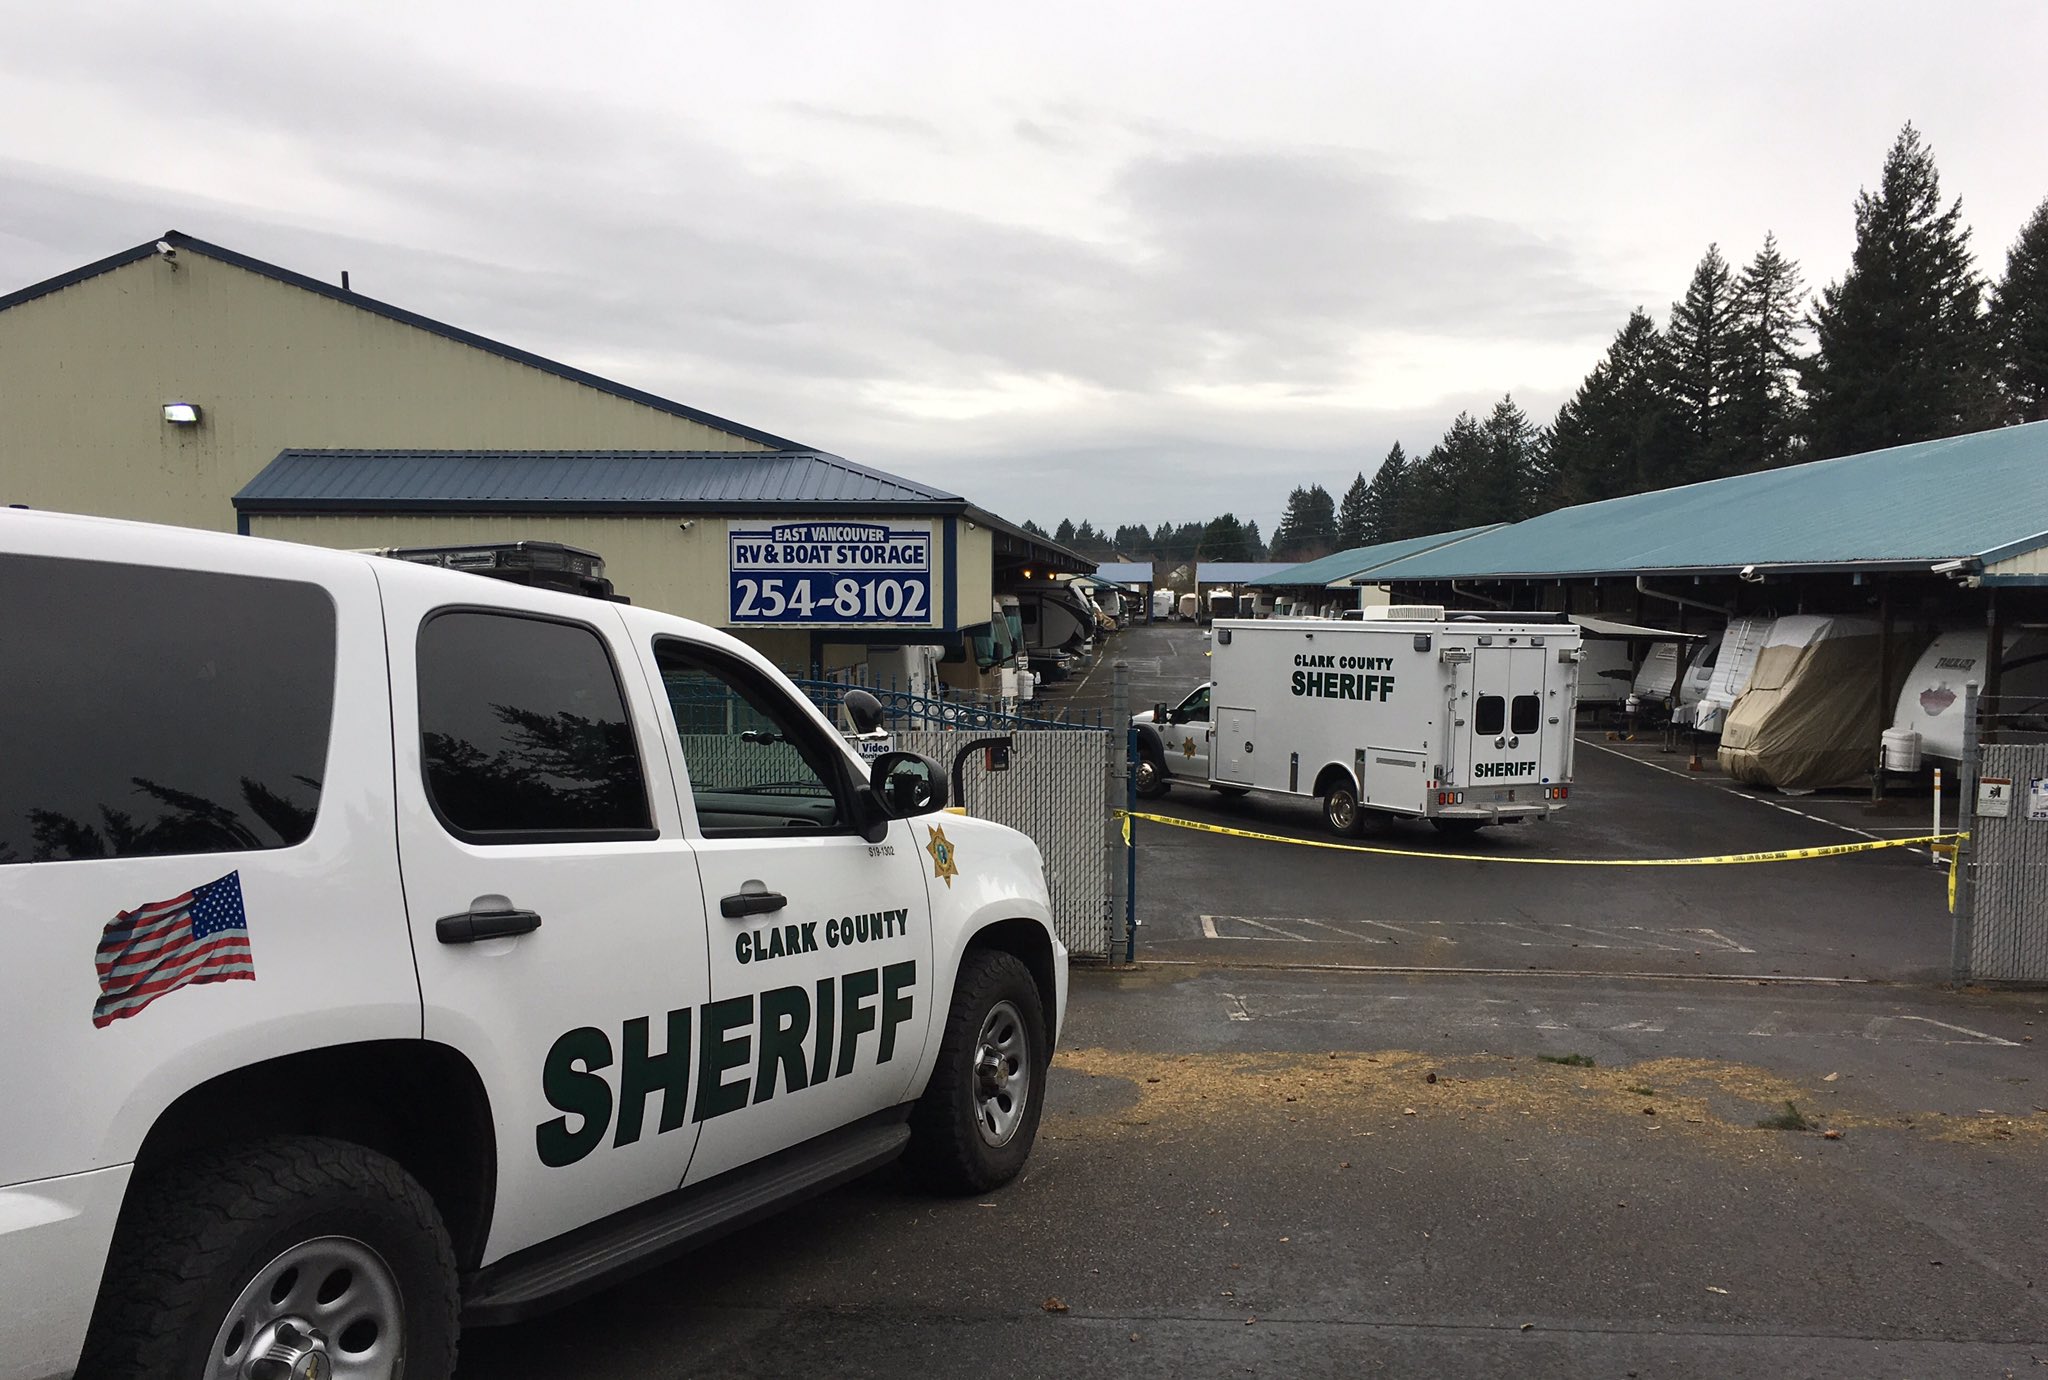 Clark County Sheriff's Office major crimes unit is investigating a suspicious death at an RV storage unit business located at 1306 N.E. 172nd Ave. on Friday, Dec. 15, 2017.